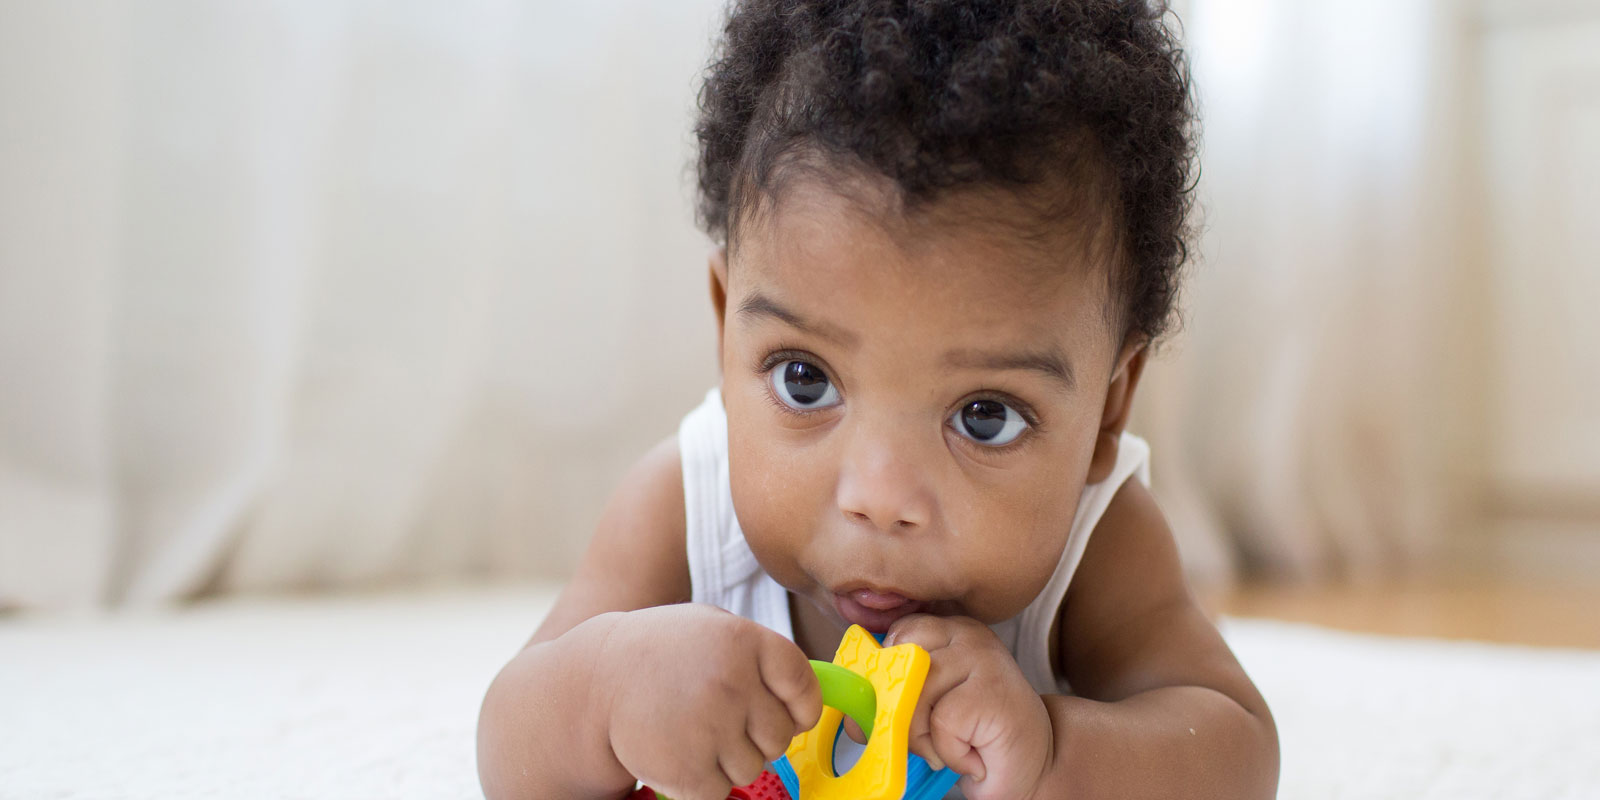 Baby Physical Development 4 Months: What to Expect